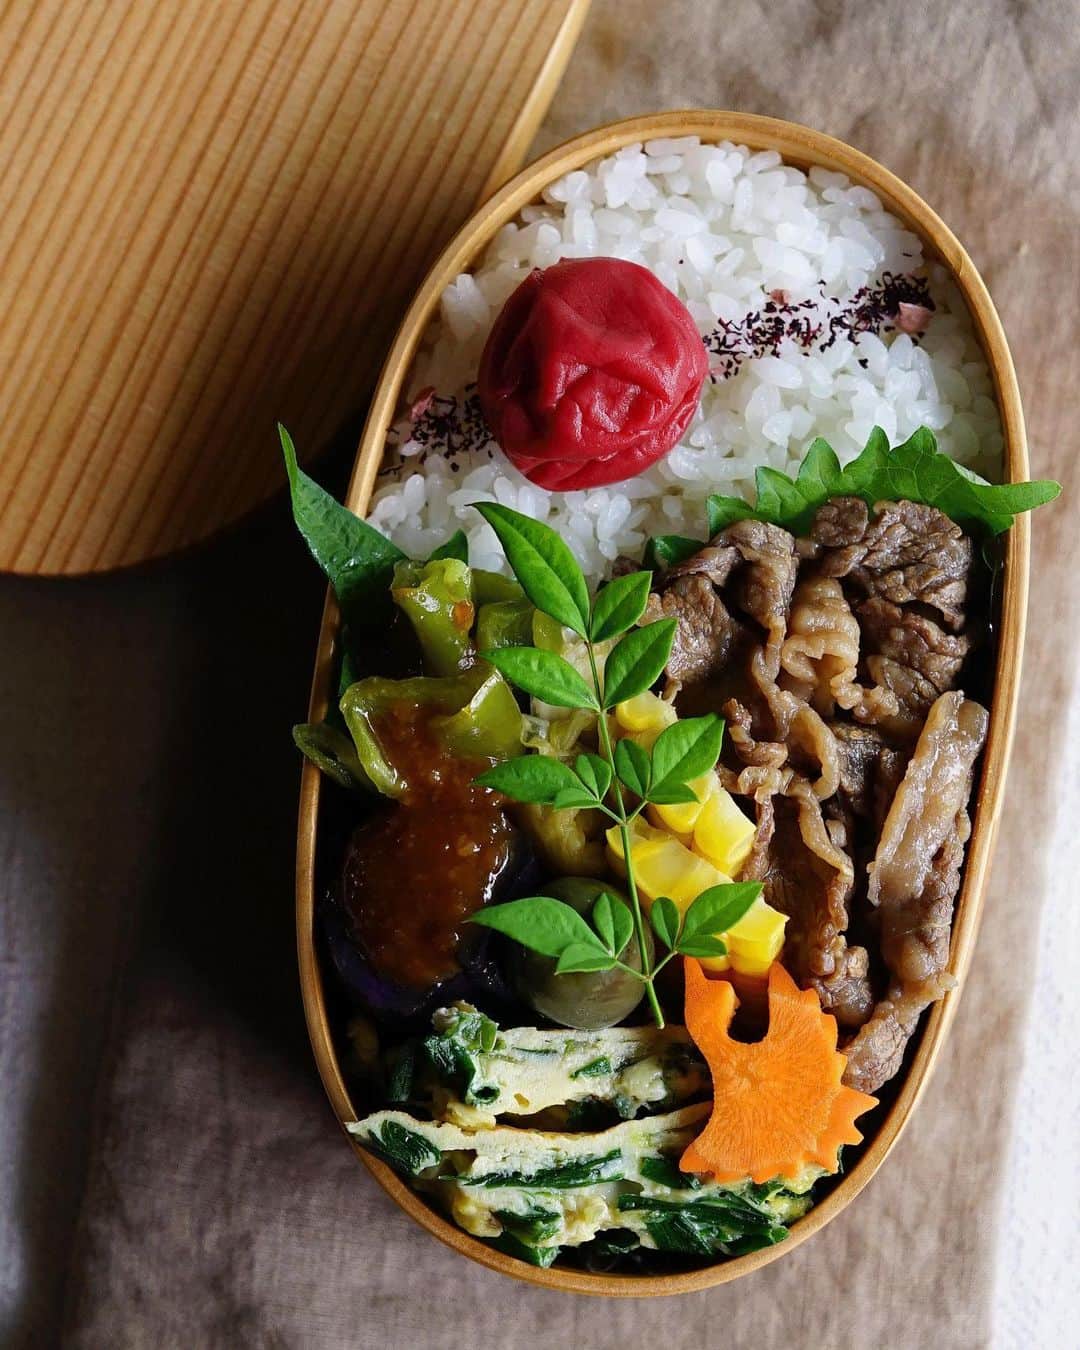 Ryoko Yunokiのインスタグラム：「+ + + Soy-glazed beef bento/牛肉の時雨煮弁当 . *rice and umeboshi *soy-glzed beef *fried eggplant and green pepper, topped with miso dressing *omelette with chinese chives *steamed sweet corn . ＊ご飯と梅干し ＊牛肉の時雨煮 ＊揚げ茄子と獅子唐の田楽味噌がけ ＊にら卵 ＊蒸しトウモロコシ + + + #bento #お弁当 #丸の内弁当 #f52grams #曲げわっぱ #大館曲げわっぱ」